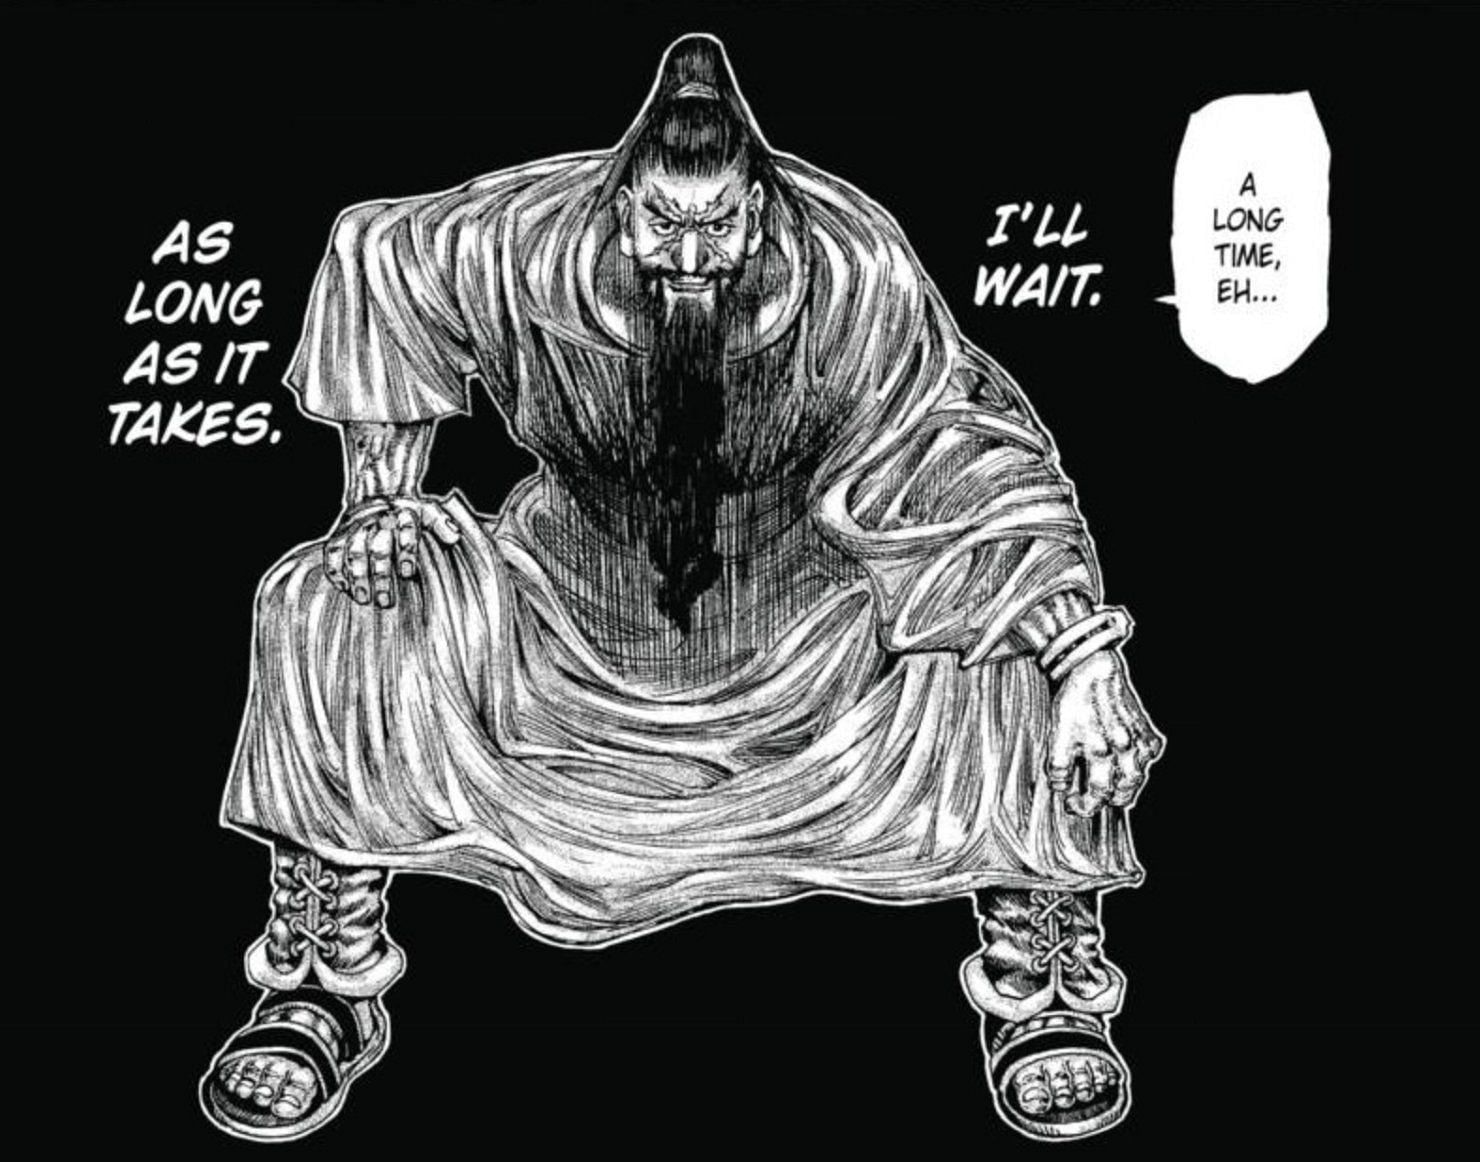 One of the sweetest panel in the HxH for me. Dark continent arc becomes  more and more interesting. : r/HunterXHunter